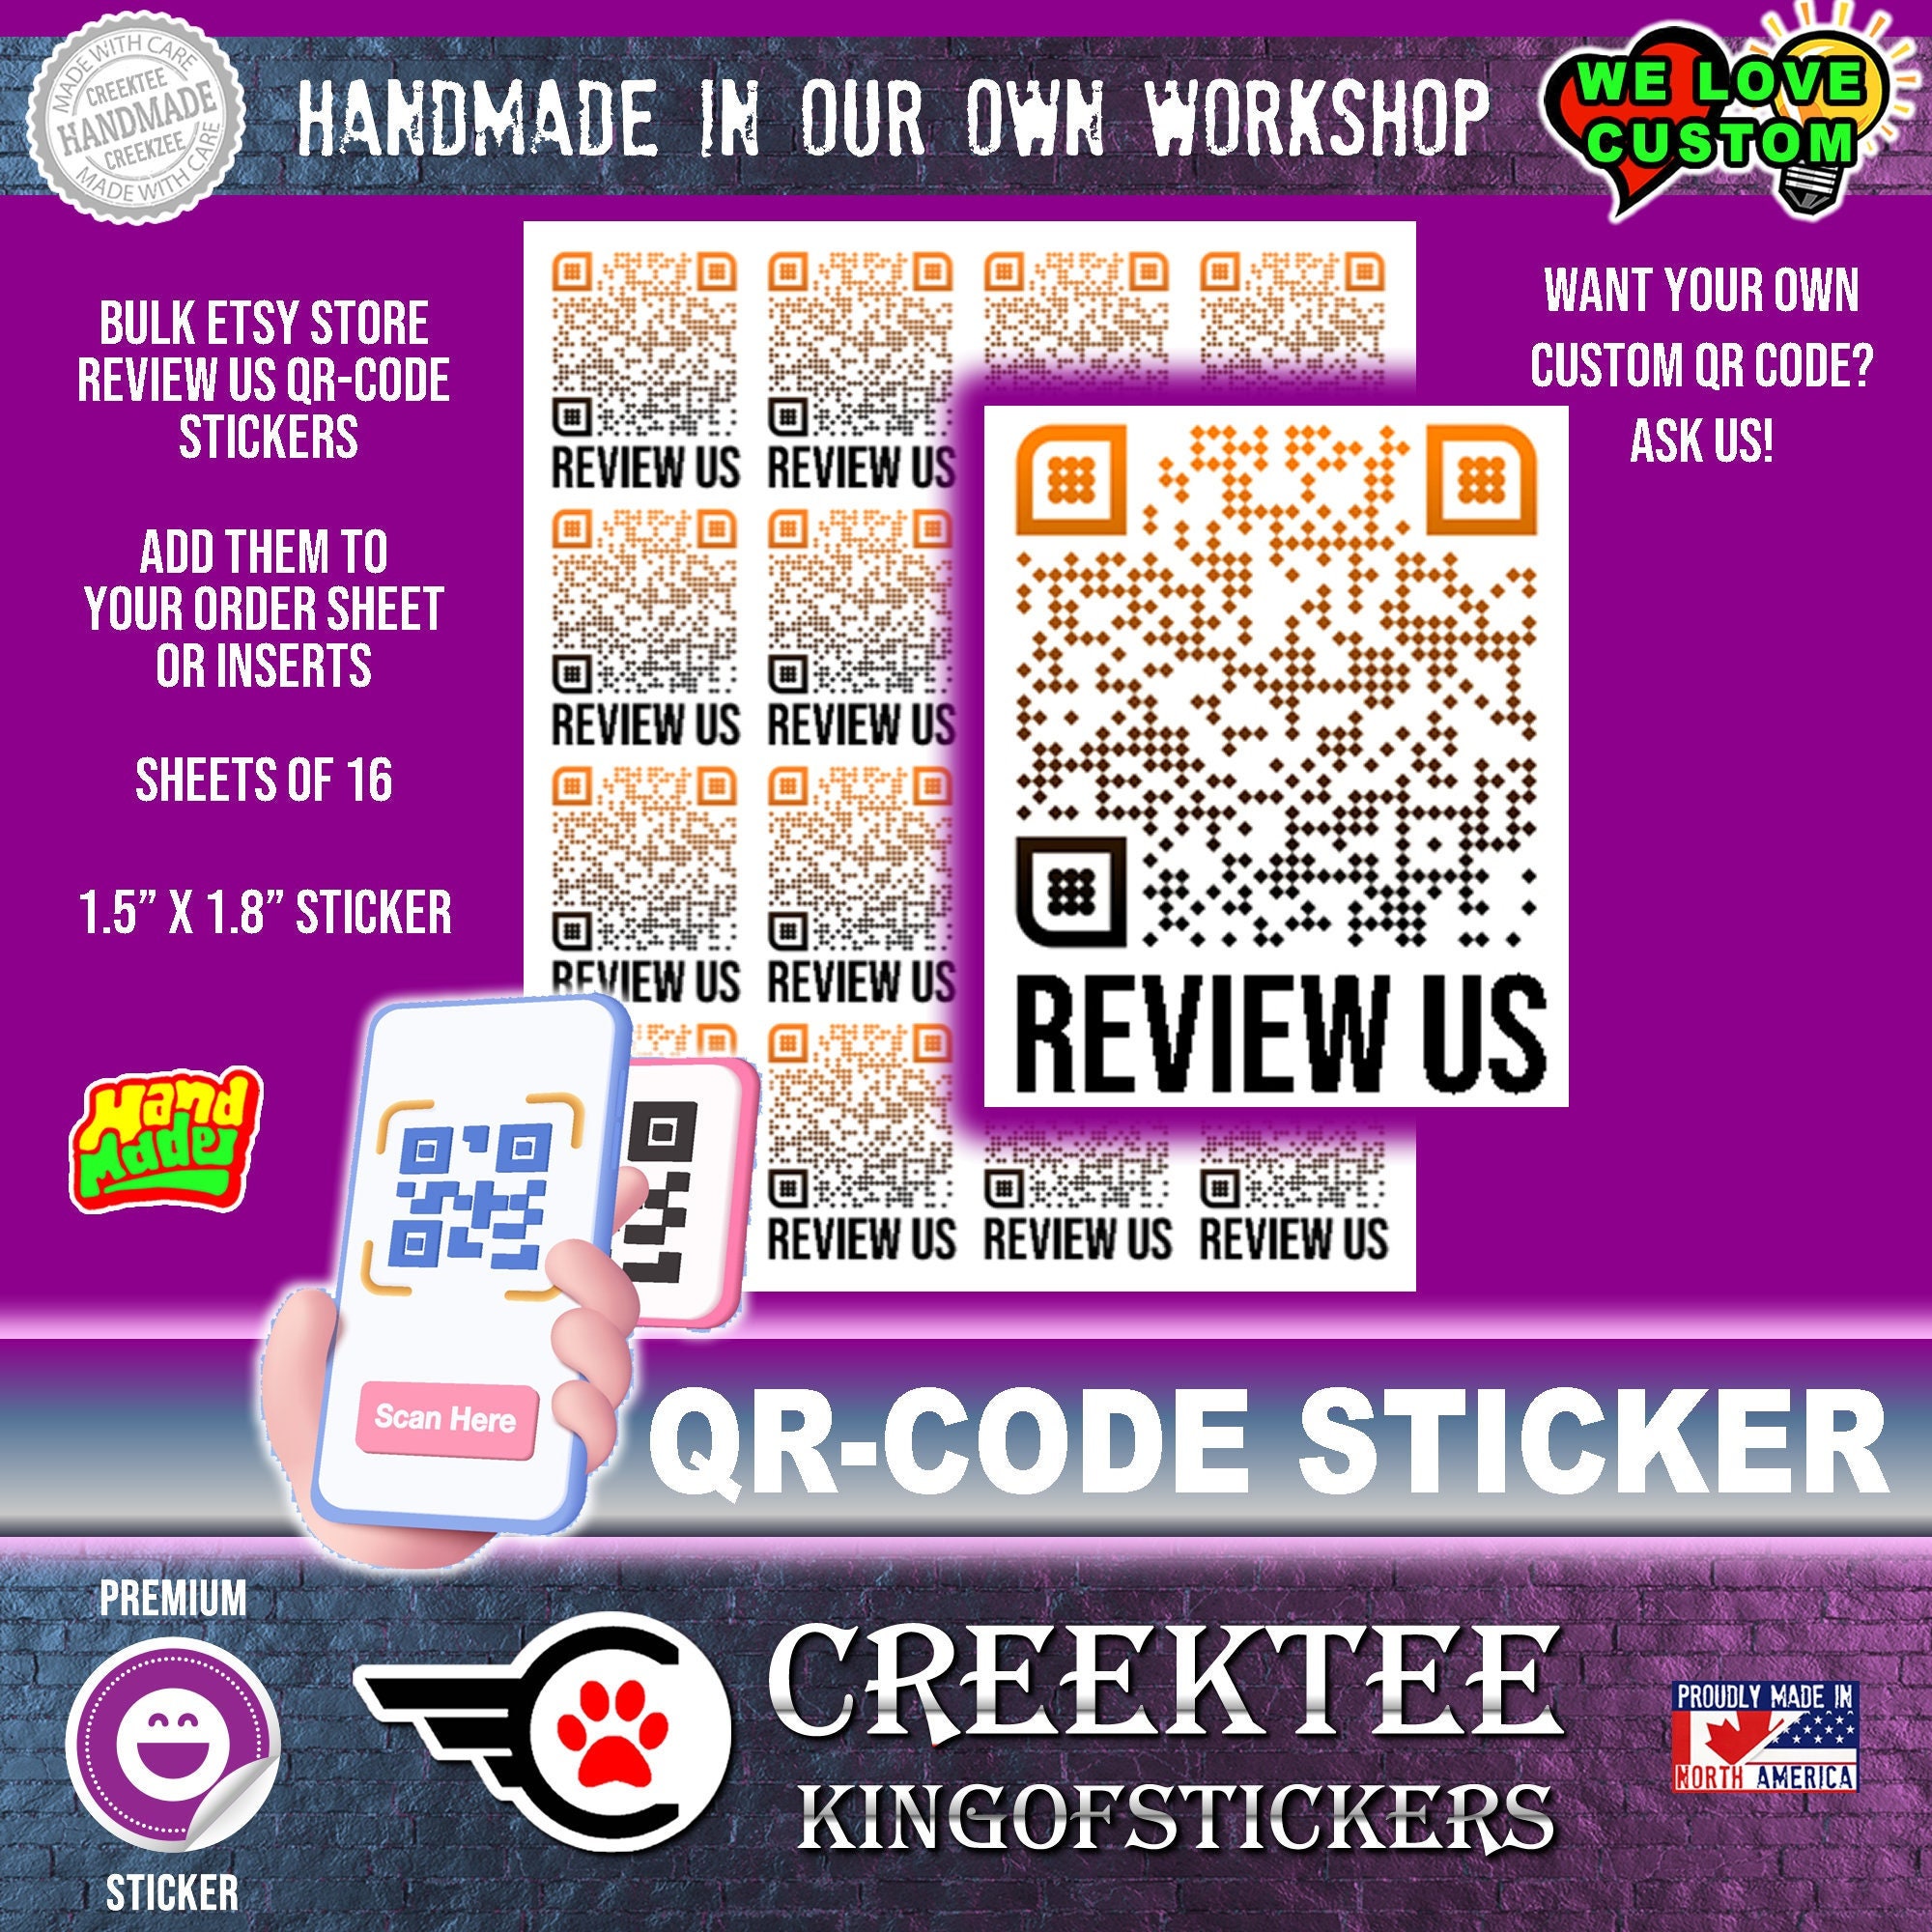 1.5 inch x 1.8 inch Etsy Review Us QR-Code Stickers or Custom QR-Code Stickers in sheets of 16